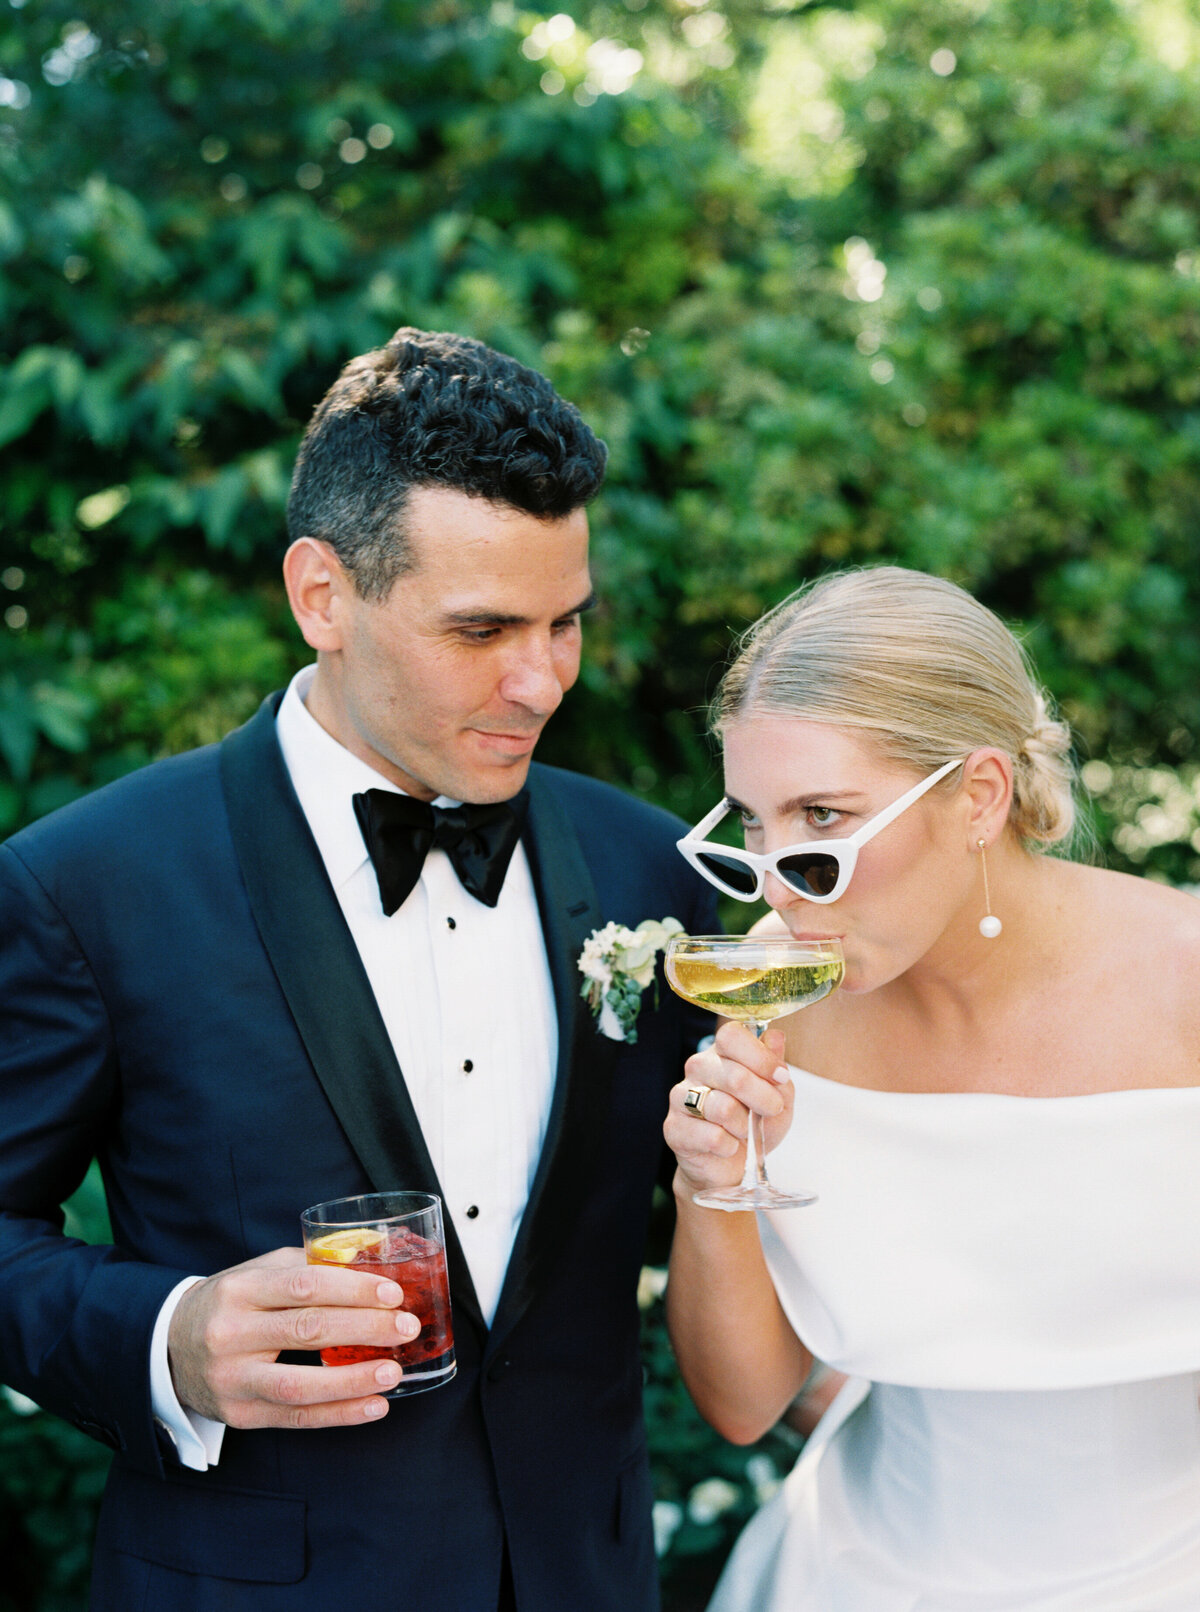 Liz Andolina Photography Destination Wedding Photographer in Italy, New York, Across the East Coast Editorial, heritage-quality images for stylish couples MK & Achille-Liz Andolina Photography-787